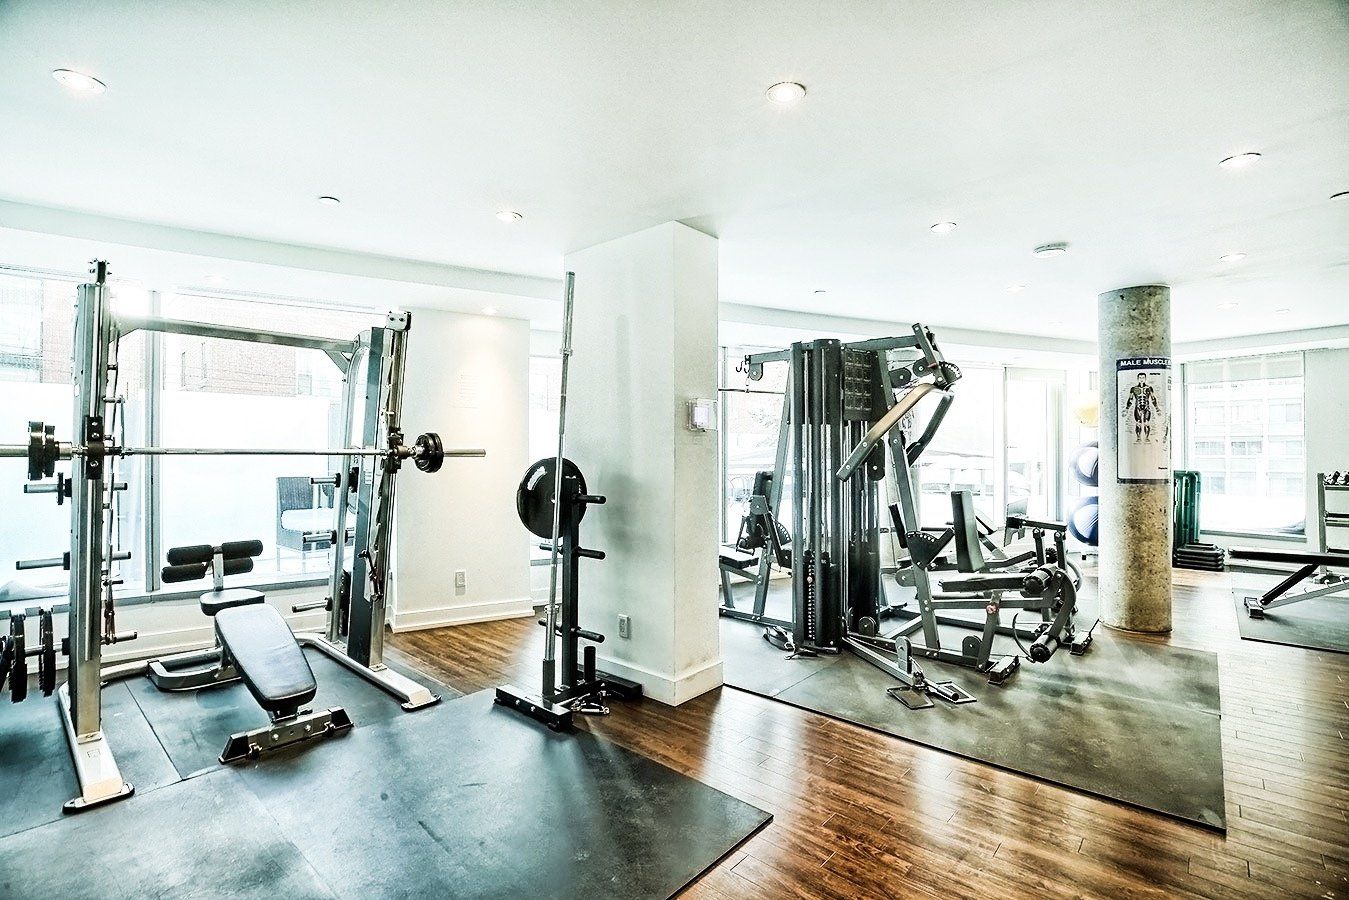 State of the art fitness centre with a mixture of free weights, elliptical trainers and training bikes